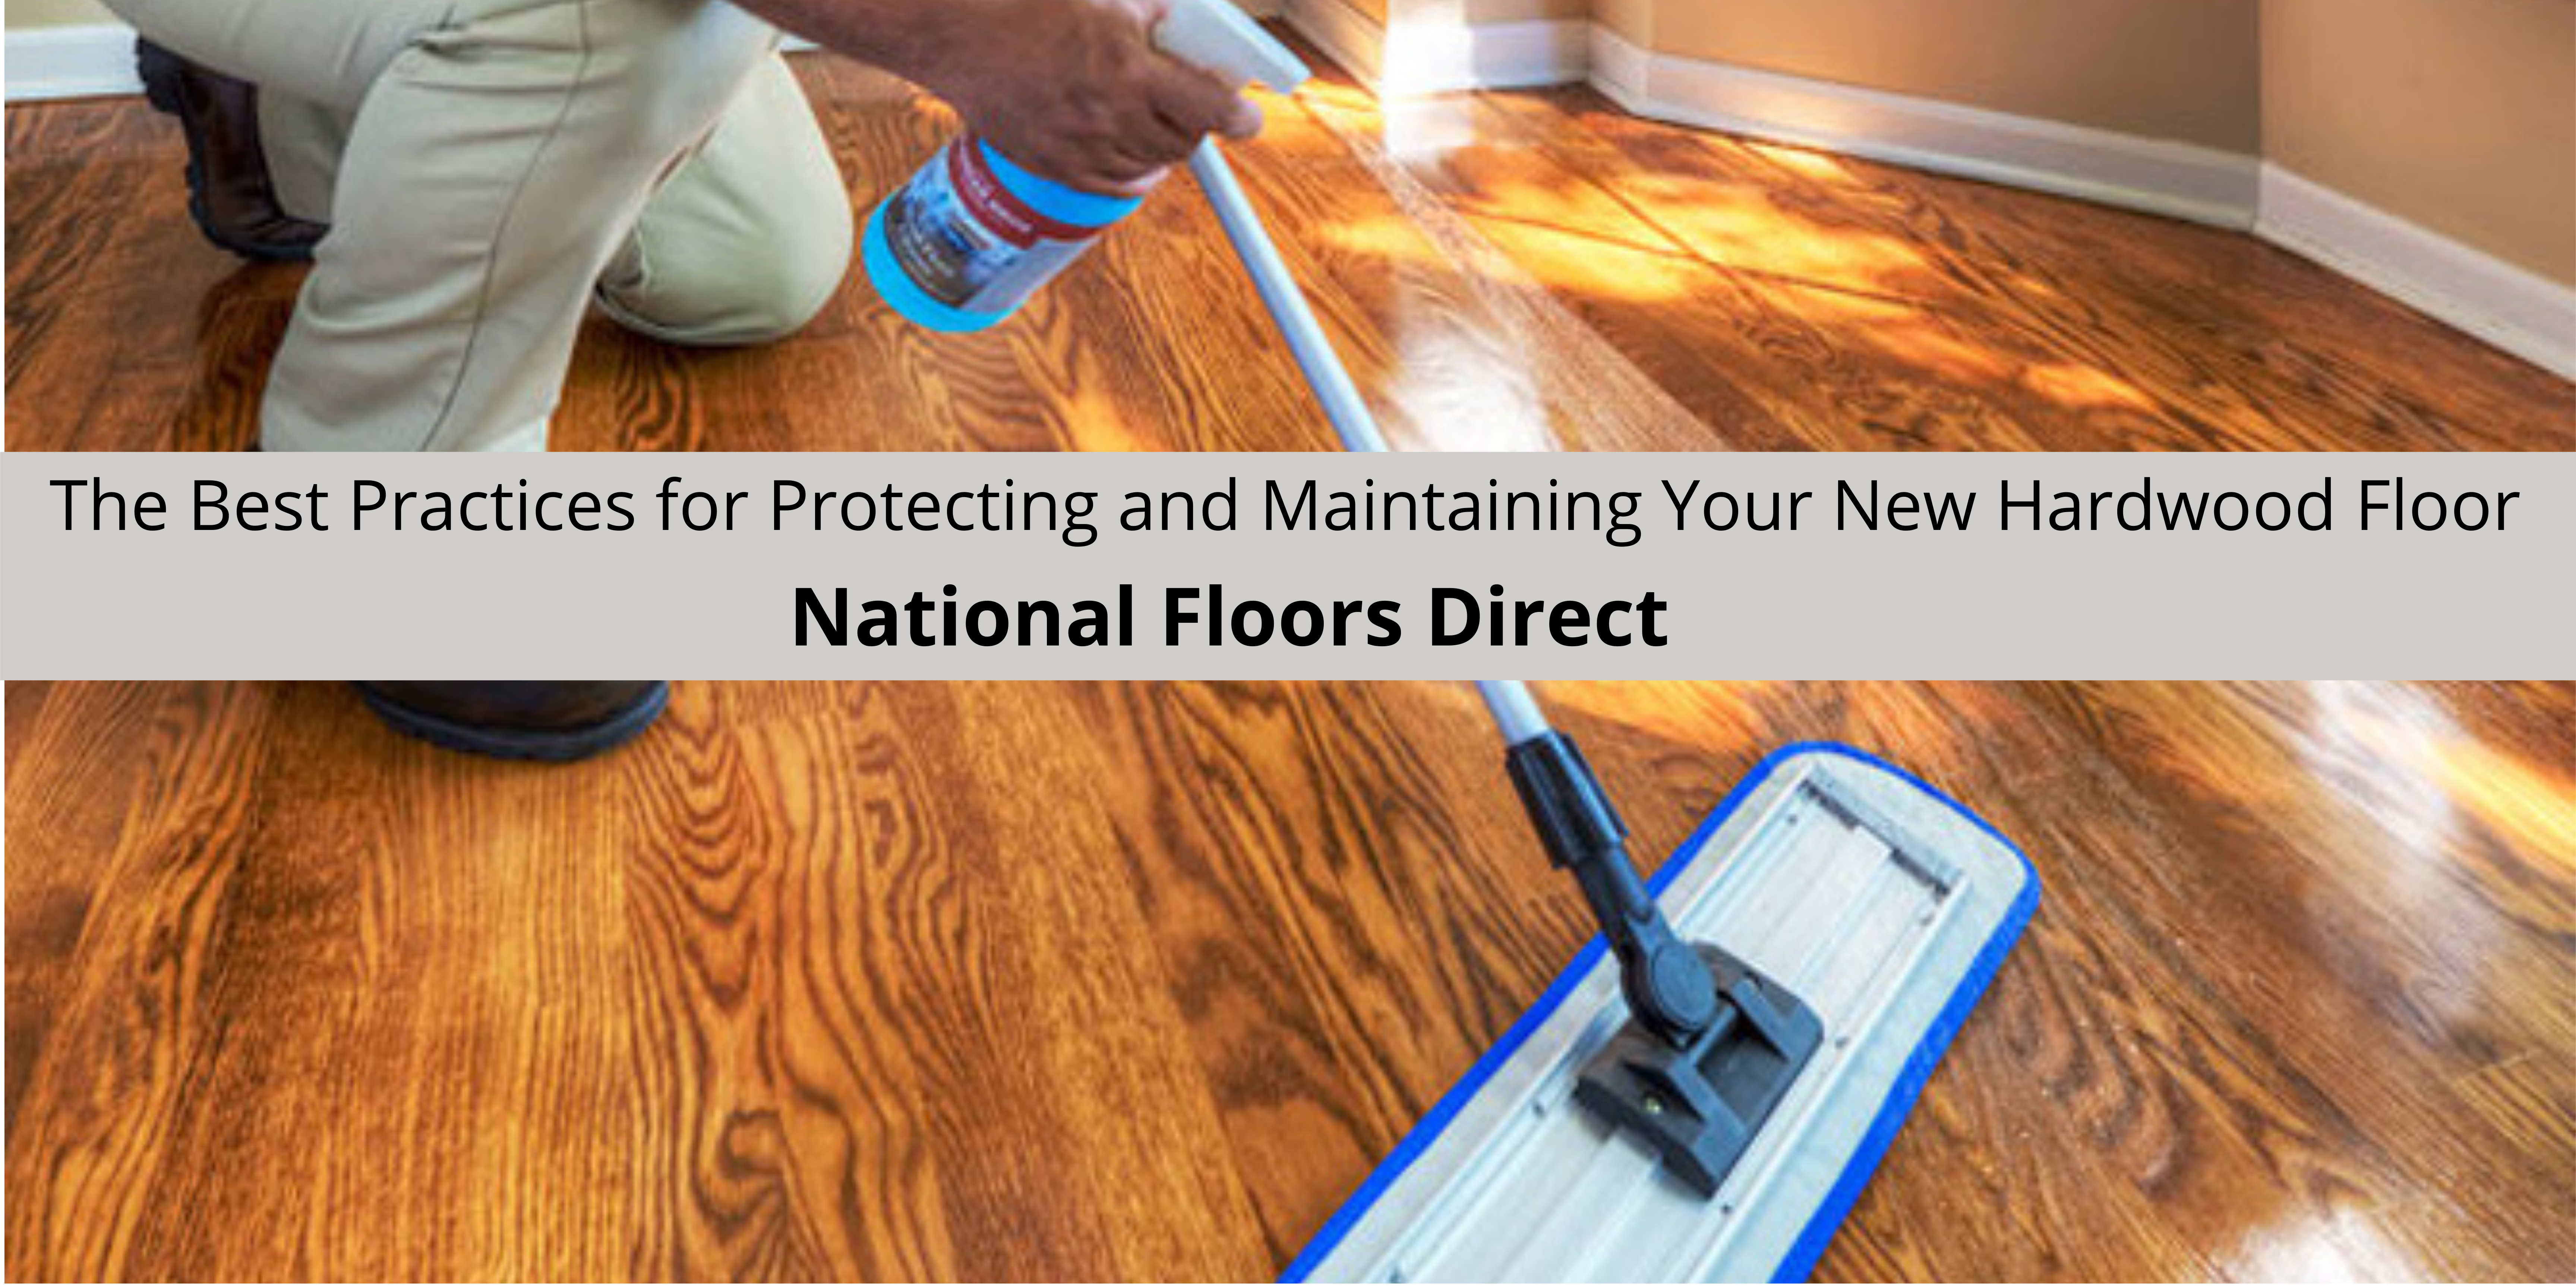 National Floors Direct Offers The Best Practices for Protecting and Maintaining Your New Hardwood Floor